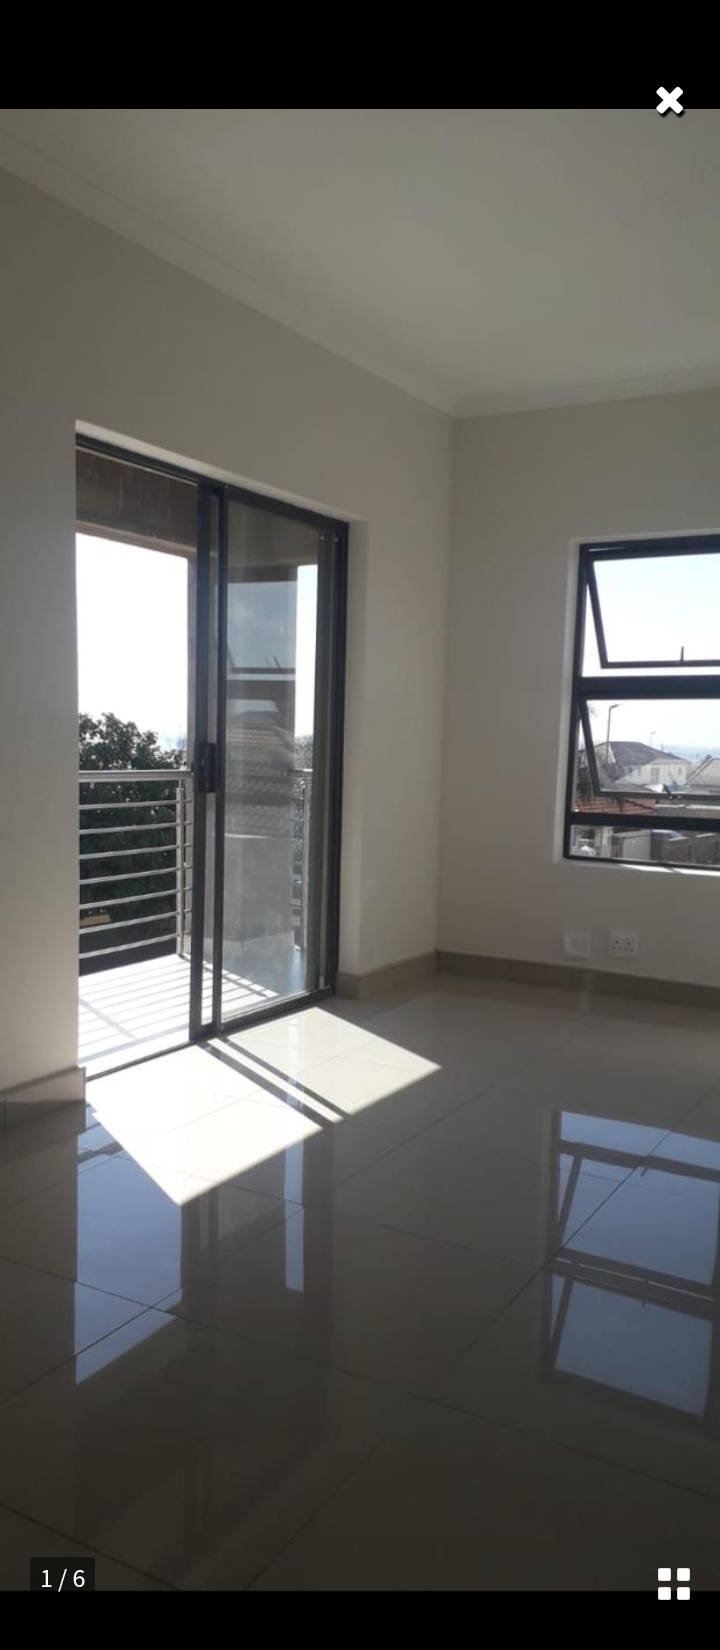 Room for rent in Birch Acres Gauteng. Listed by PropertyCentral